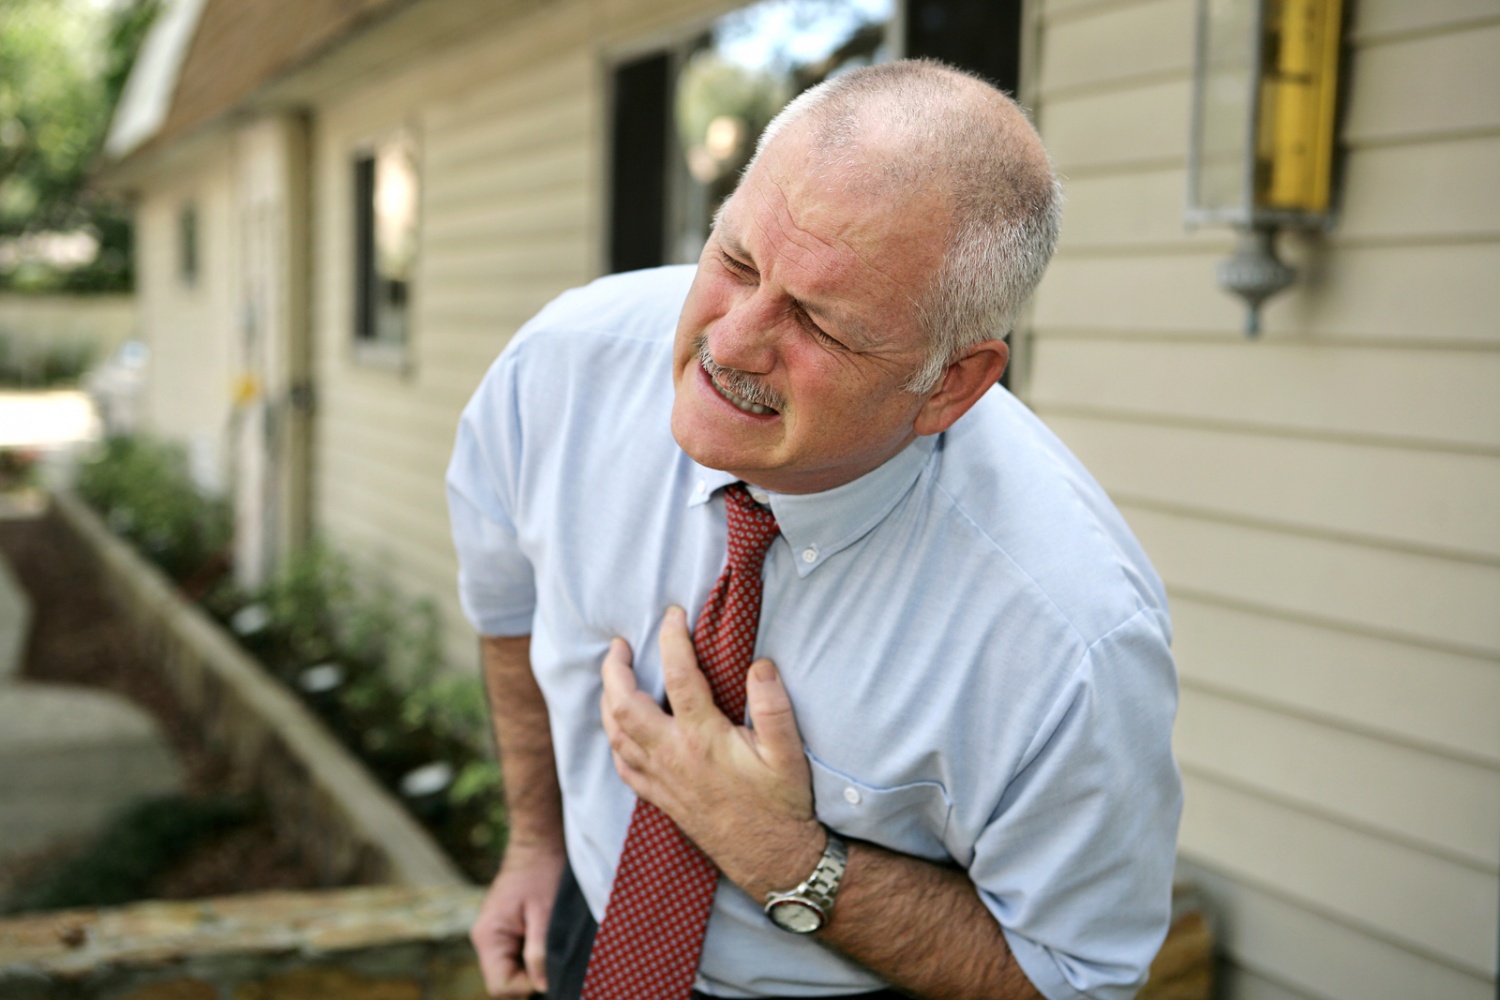 7 Signs Of A Possible Heart Attack That Must Never Be Ignored